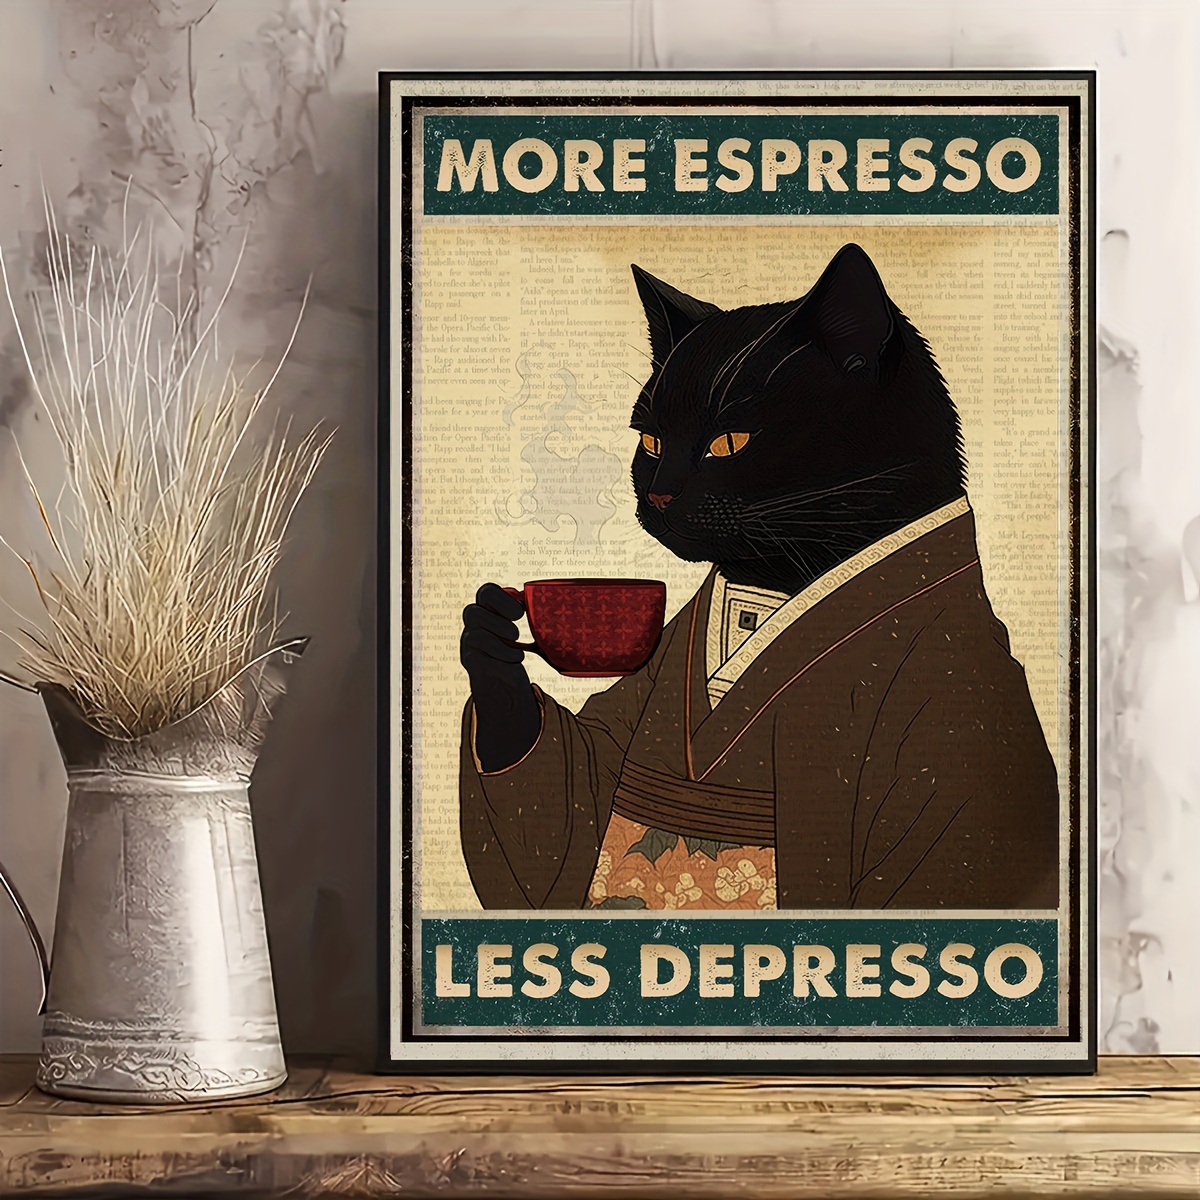 

Vintage Black Cat Espresso Art Poster - Unframed Canvas Wall Art For Bedroom, Living Room, Hallway - Modern Home Decor - More Espresso Less Depresso Canvas Print - Ideal Gift For Coffee Lovers